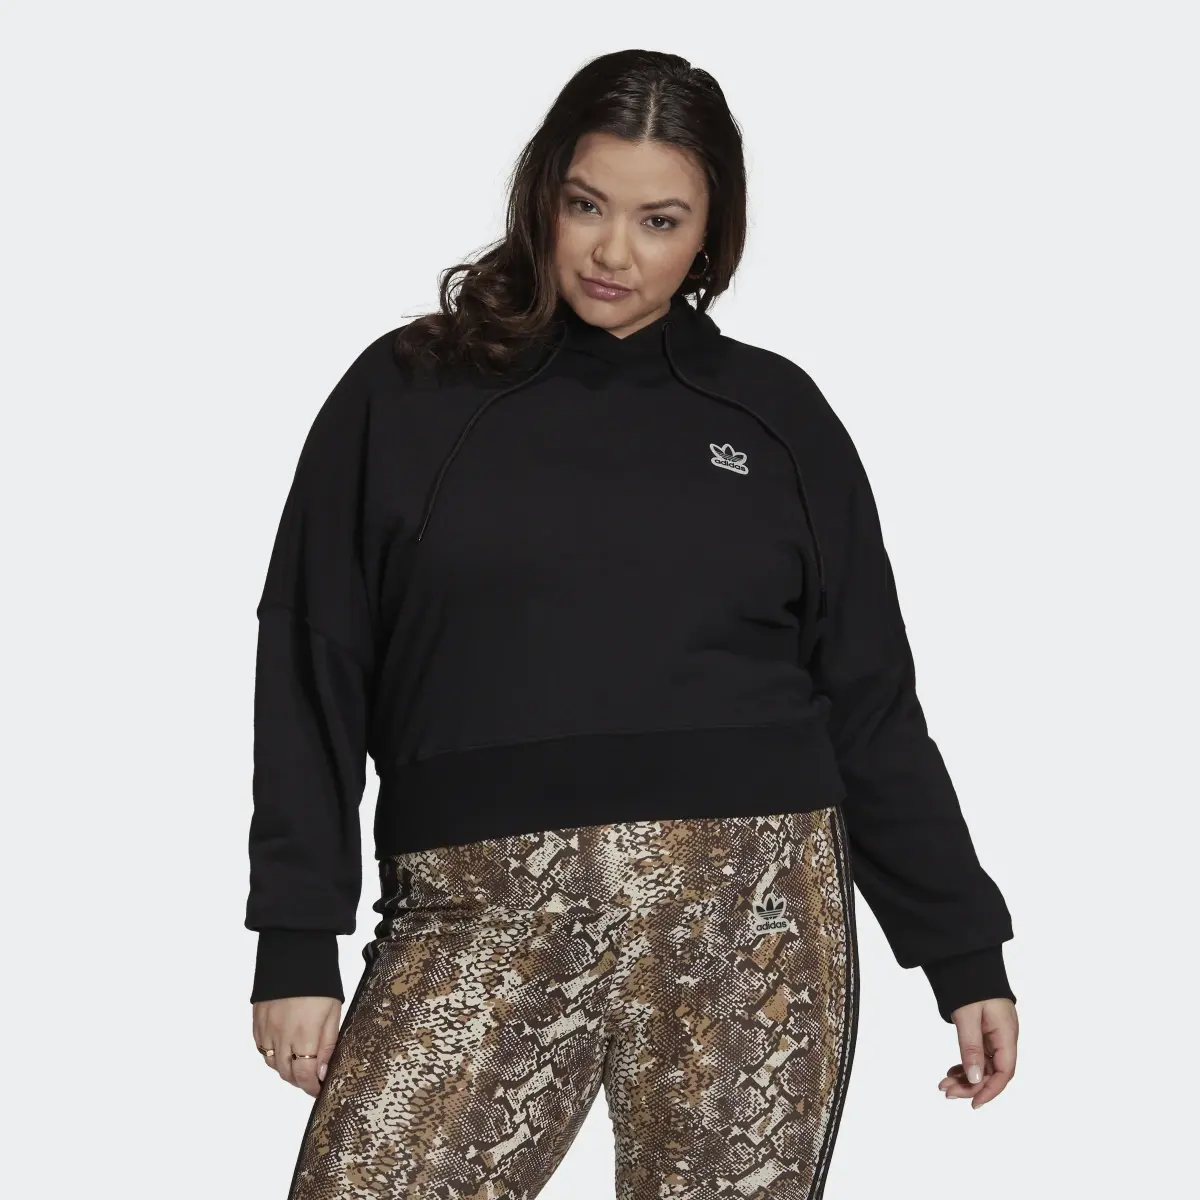 Adidas Cropped Hoodie (Plus Size). 2